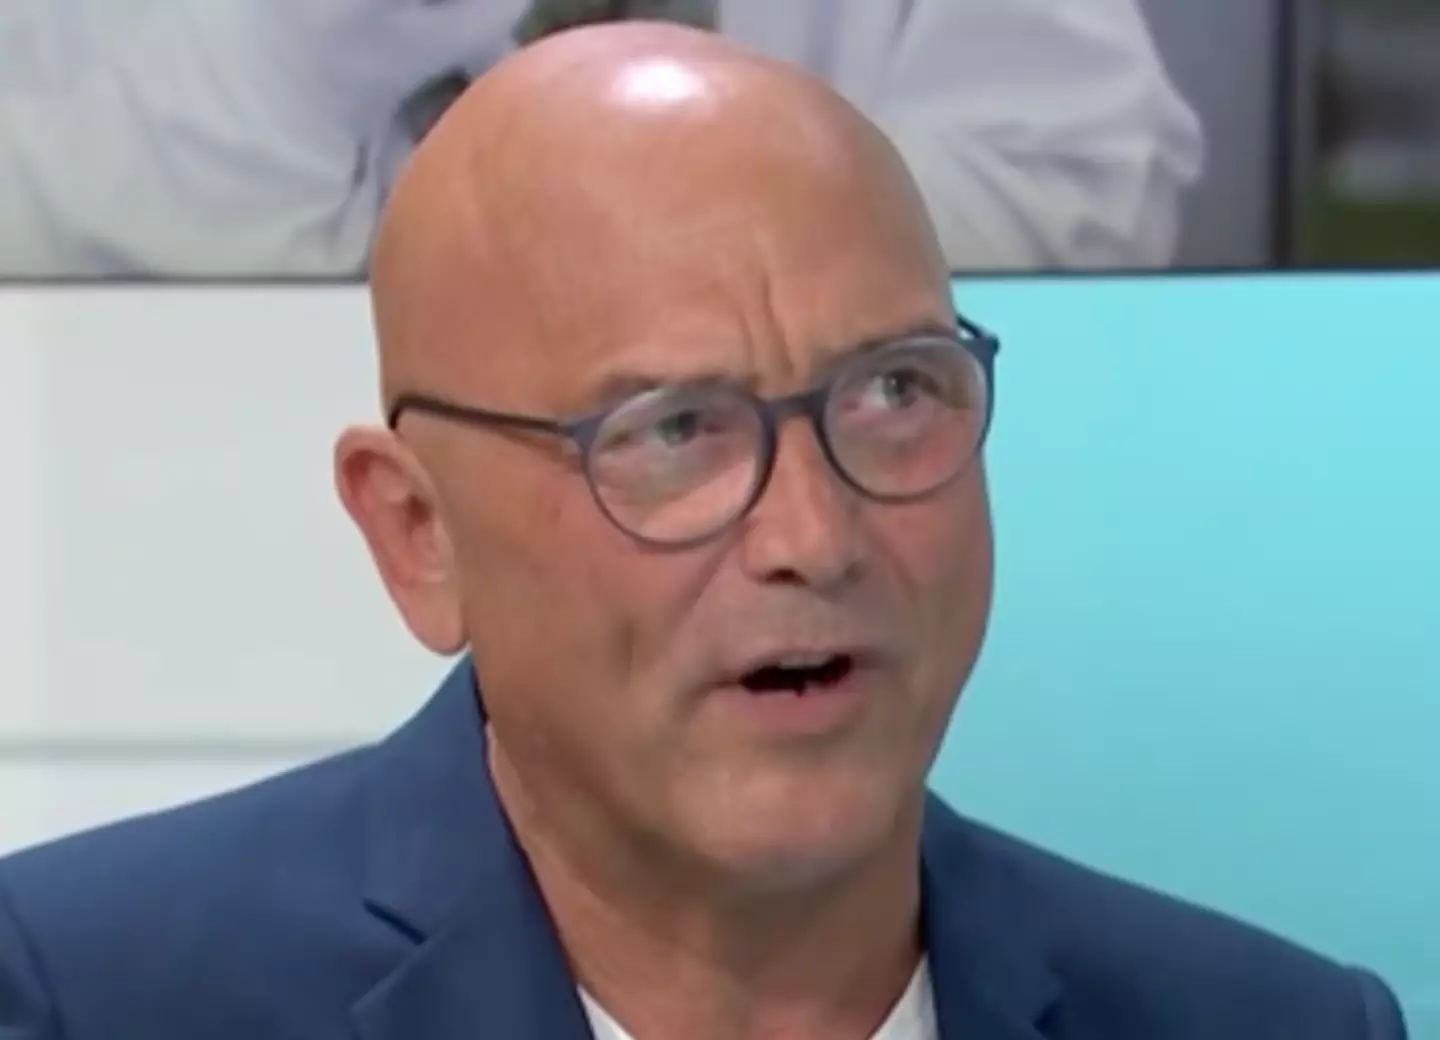 Gregg Wallace said an 'argument' took place on the show.